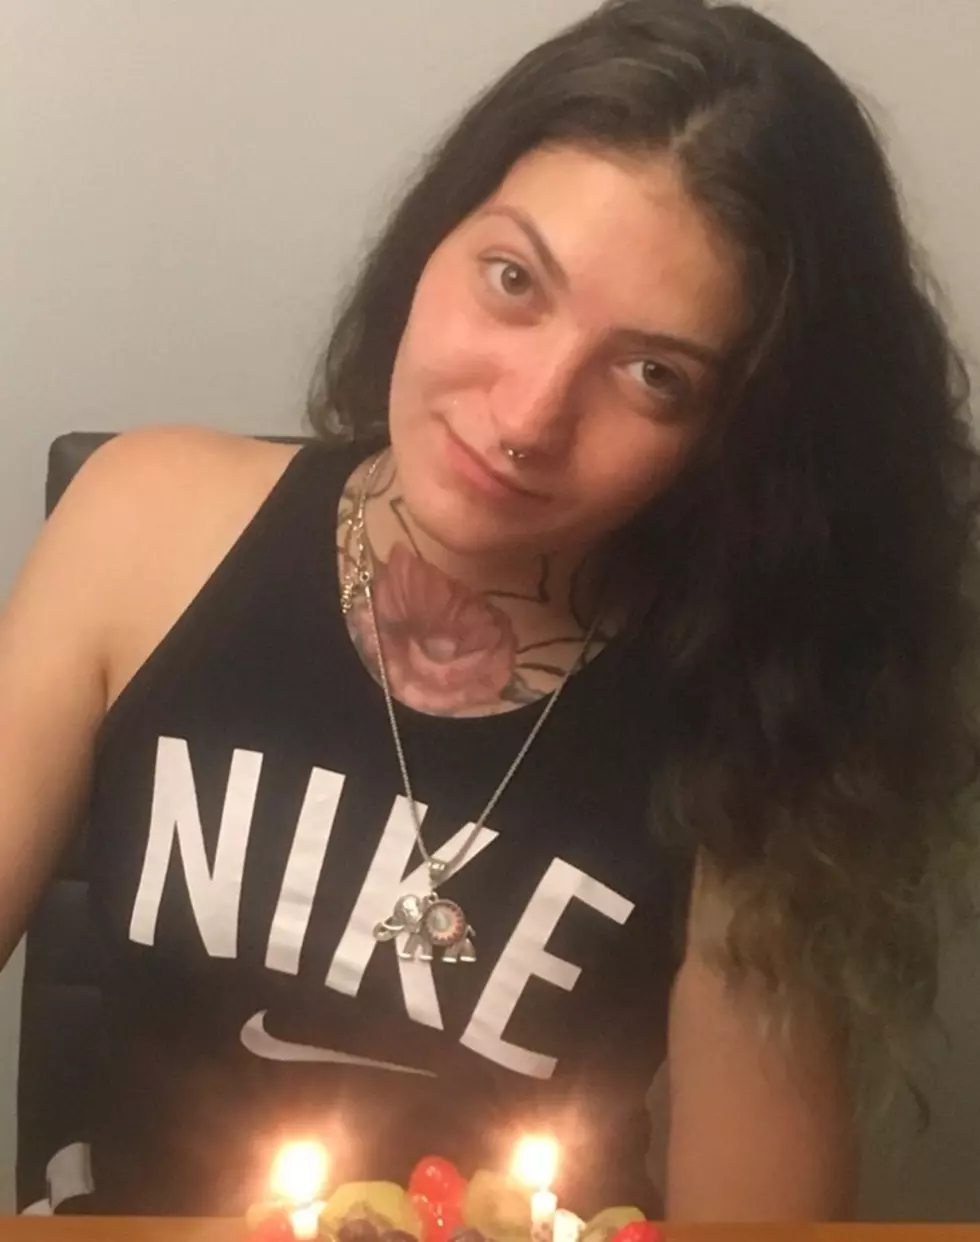 Can You Help Locate This Missing Oakland Woman